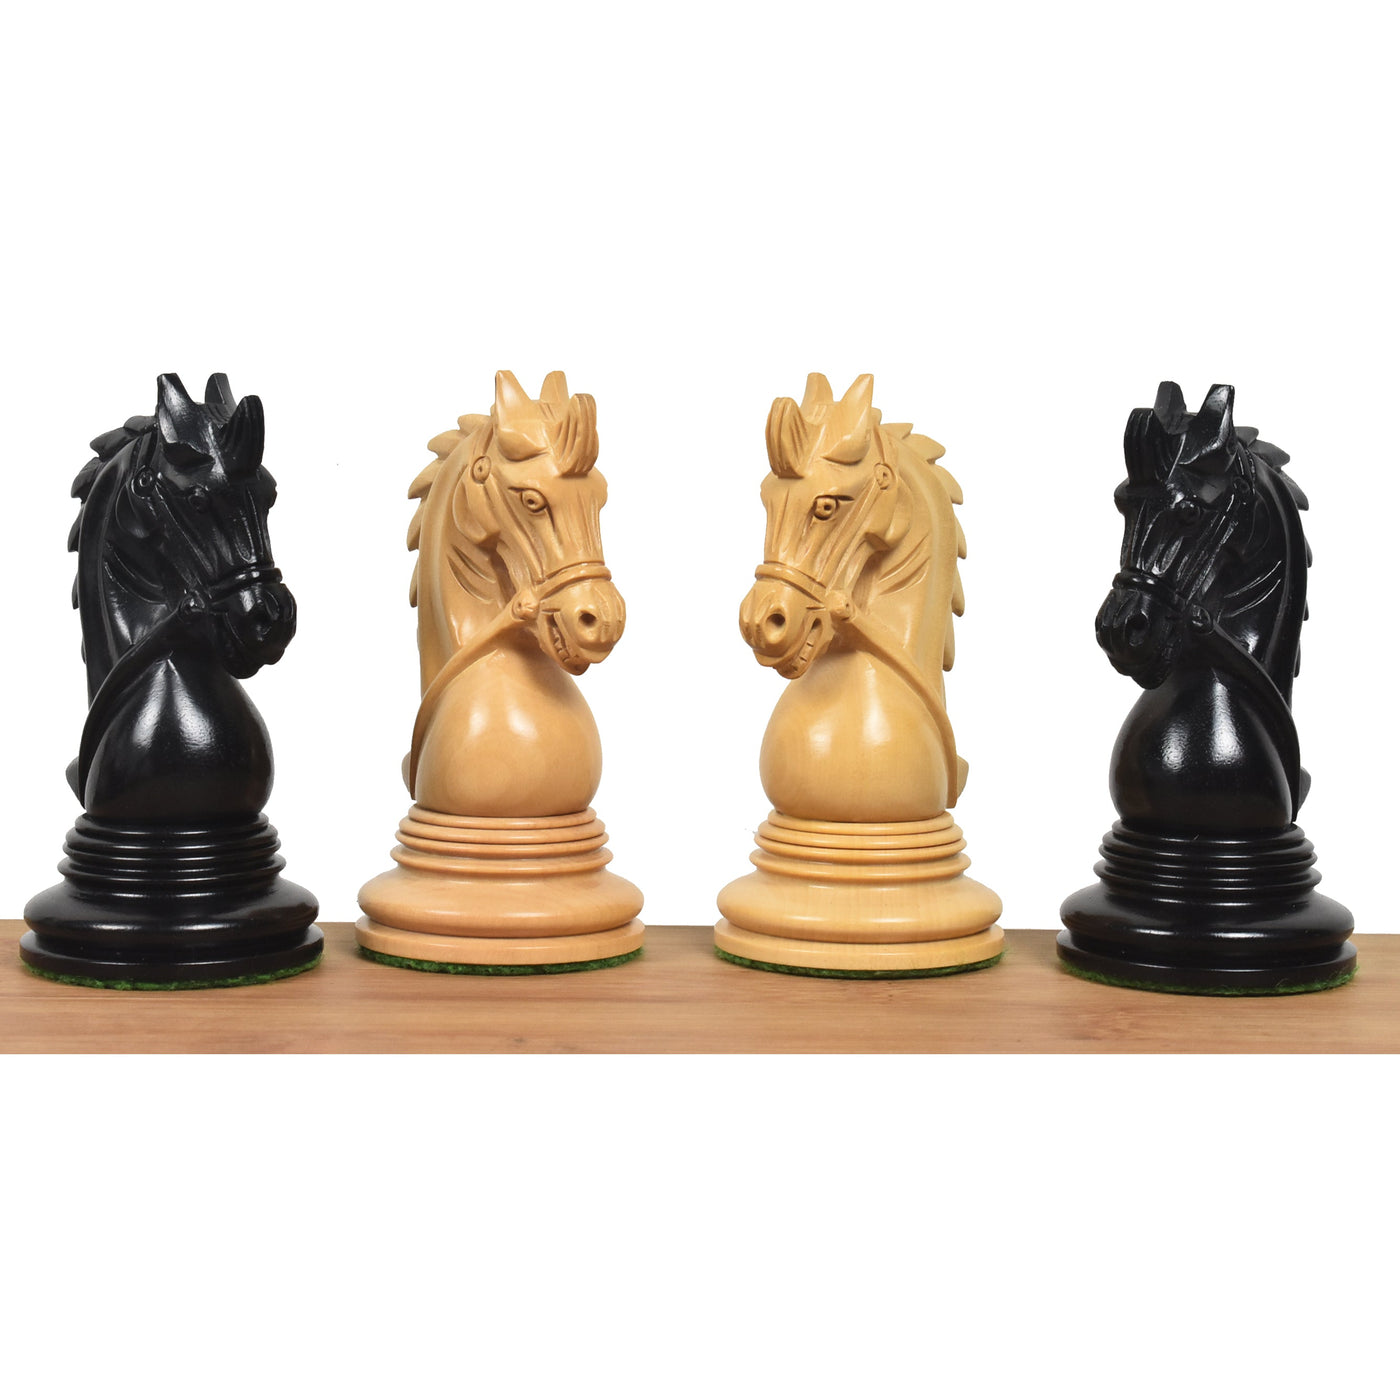 Slightly Imperfect 4.3" Napoleon Luxury Staunton Chess Set - Chess Pieces Only -Triple Weighted Ebony Wood